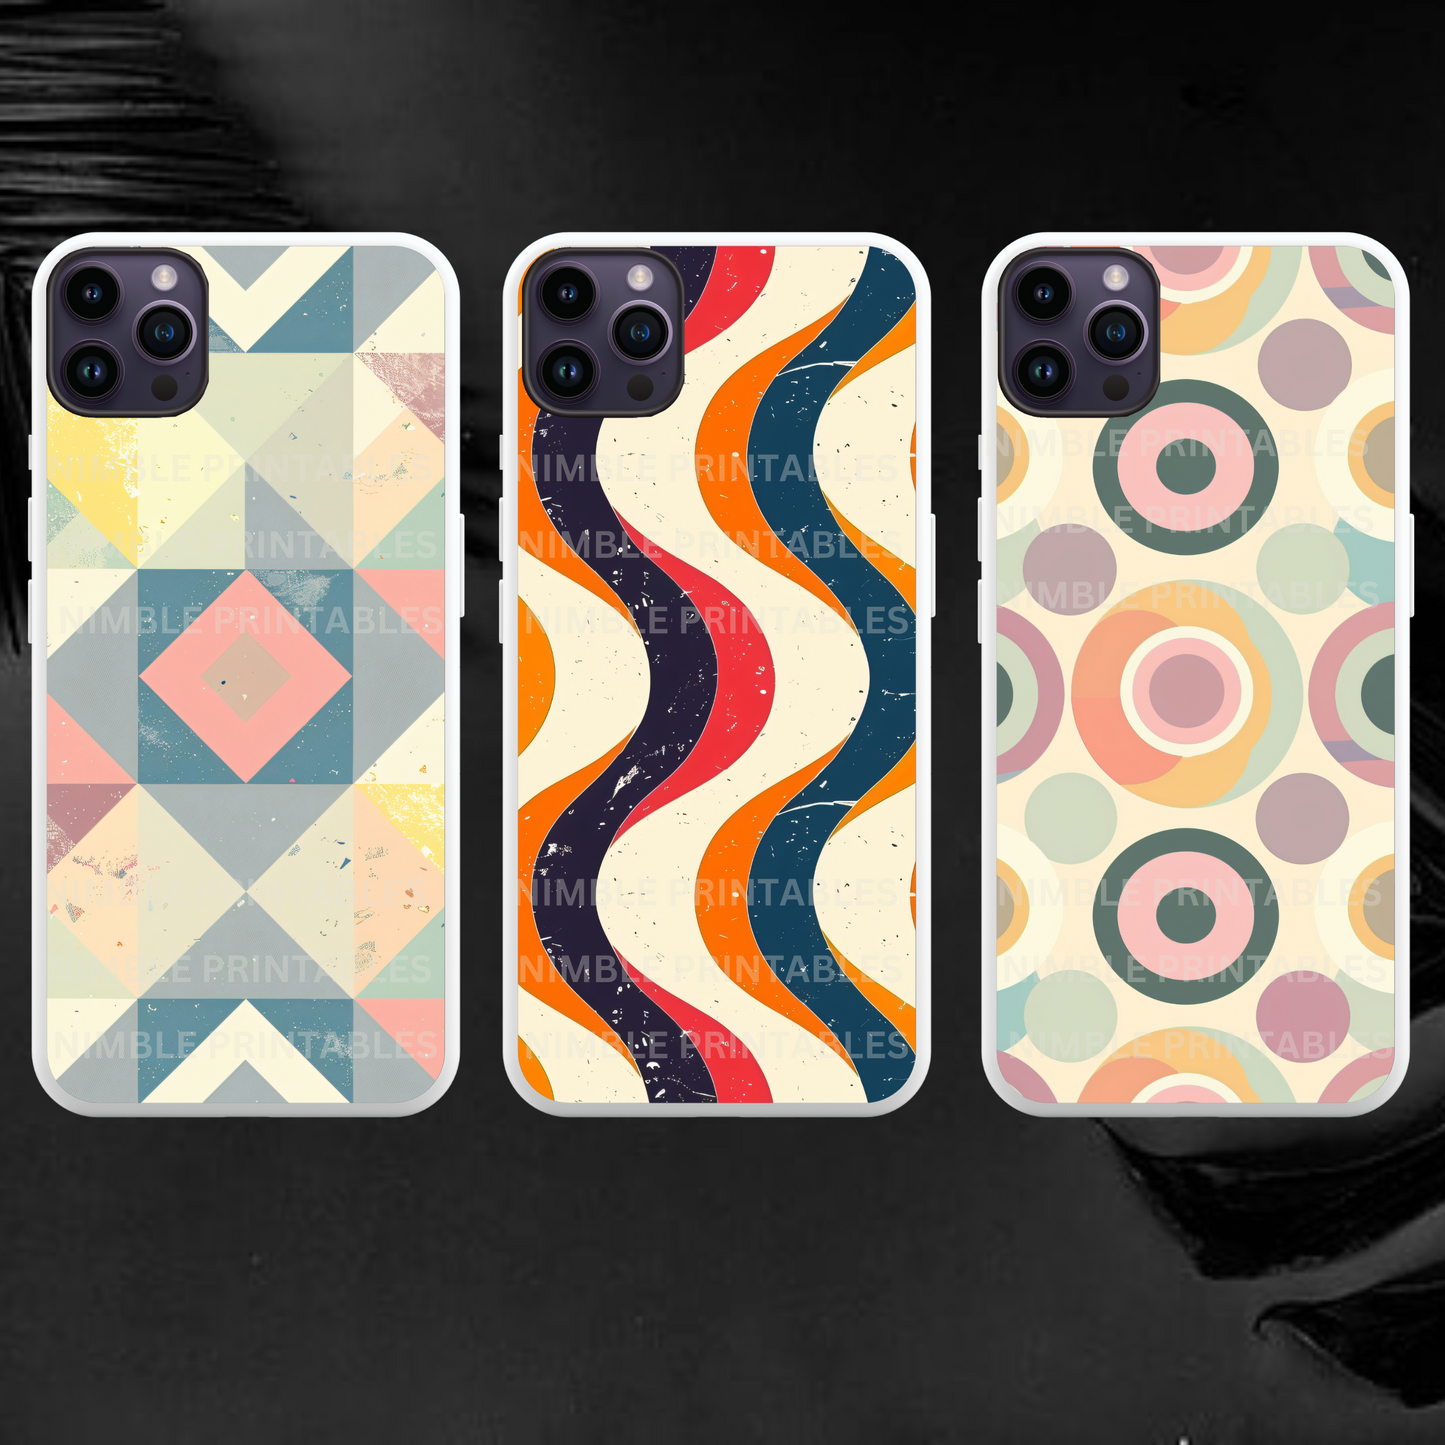 Retro Print Phone Case Sublimation, Phone Case PNG, Phone Case Design, Digital Download, Groovy PNG, Trendy PNG, Template for Custom Cases